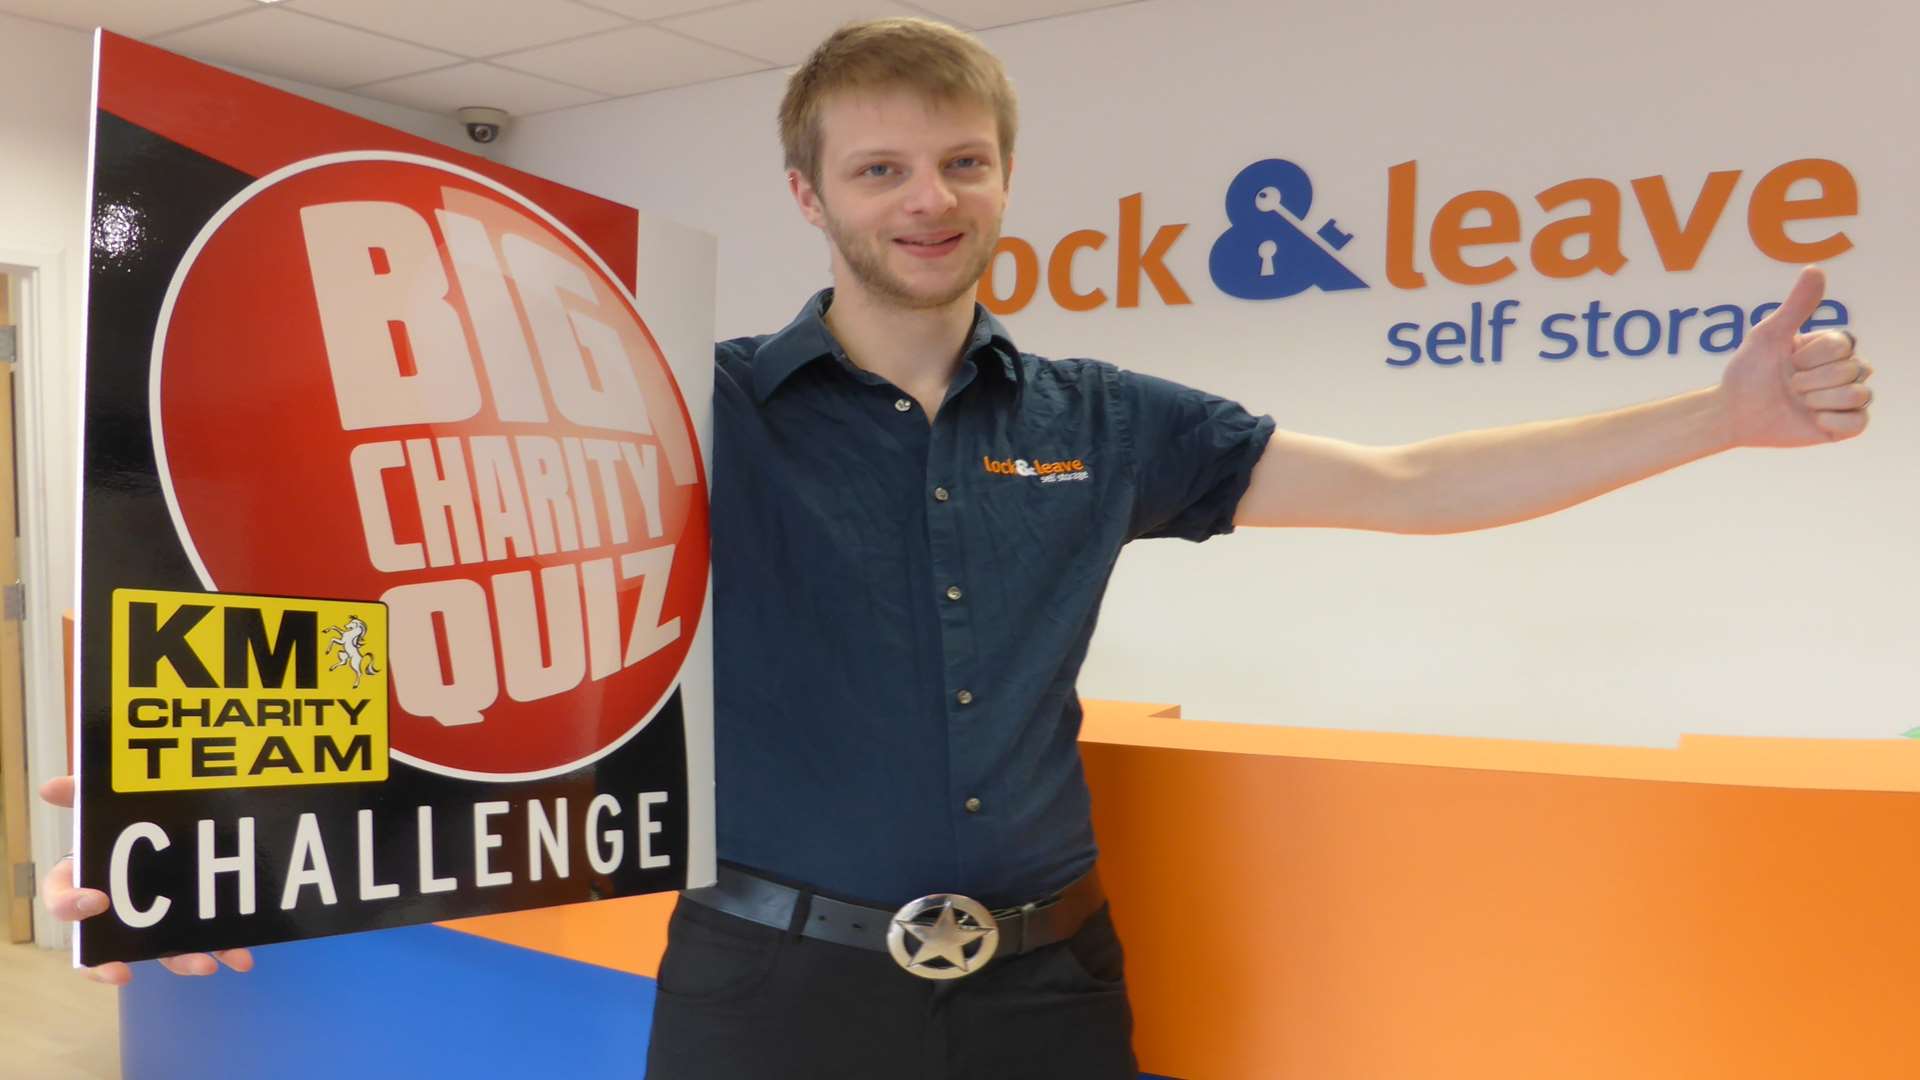 Dan Wells of Lock and Leave Self Storage announces support for Canterbury heat of KM Big Charity Quiz, staged at University of Kent sports hall on Friday, April 22